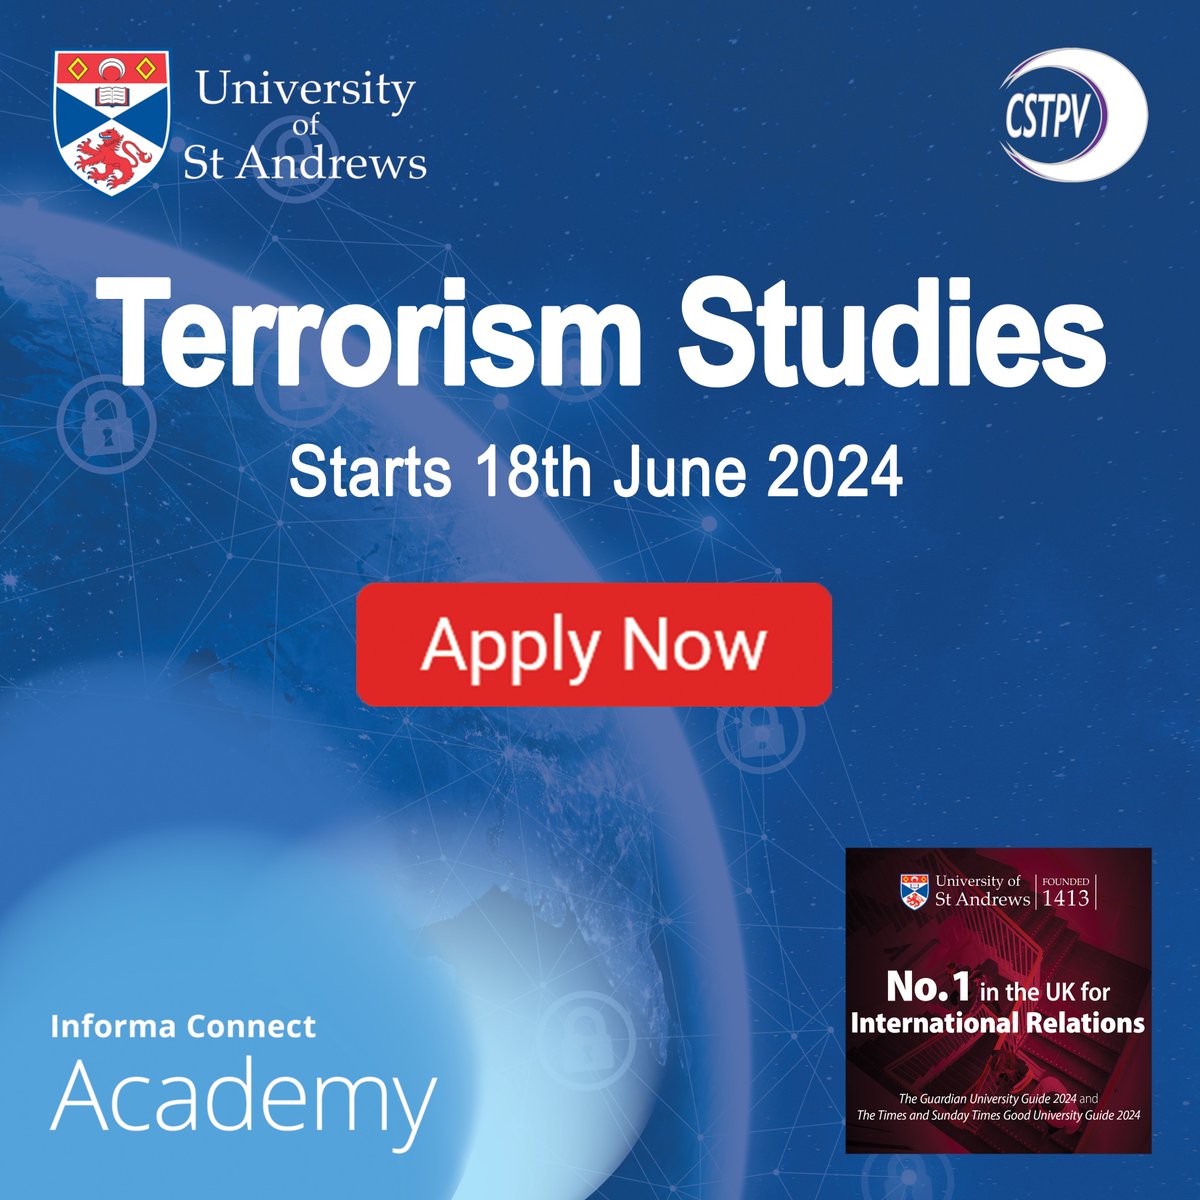 Discount Ends Today! Save up to £500… Book online now: rb.gy/g44zca Join the class of 2024 with 2x No.1 ranked University, St Andrews. #counterterrorism #security #onlinelearning #careerprogression